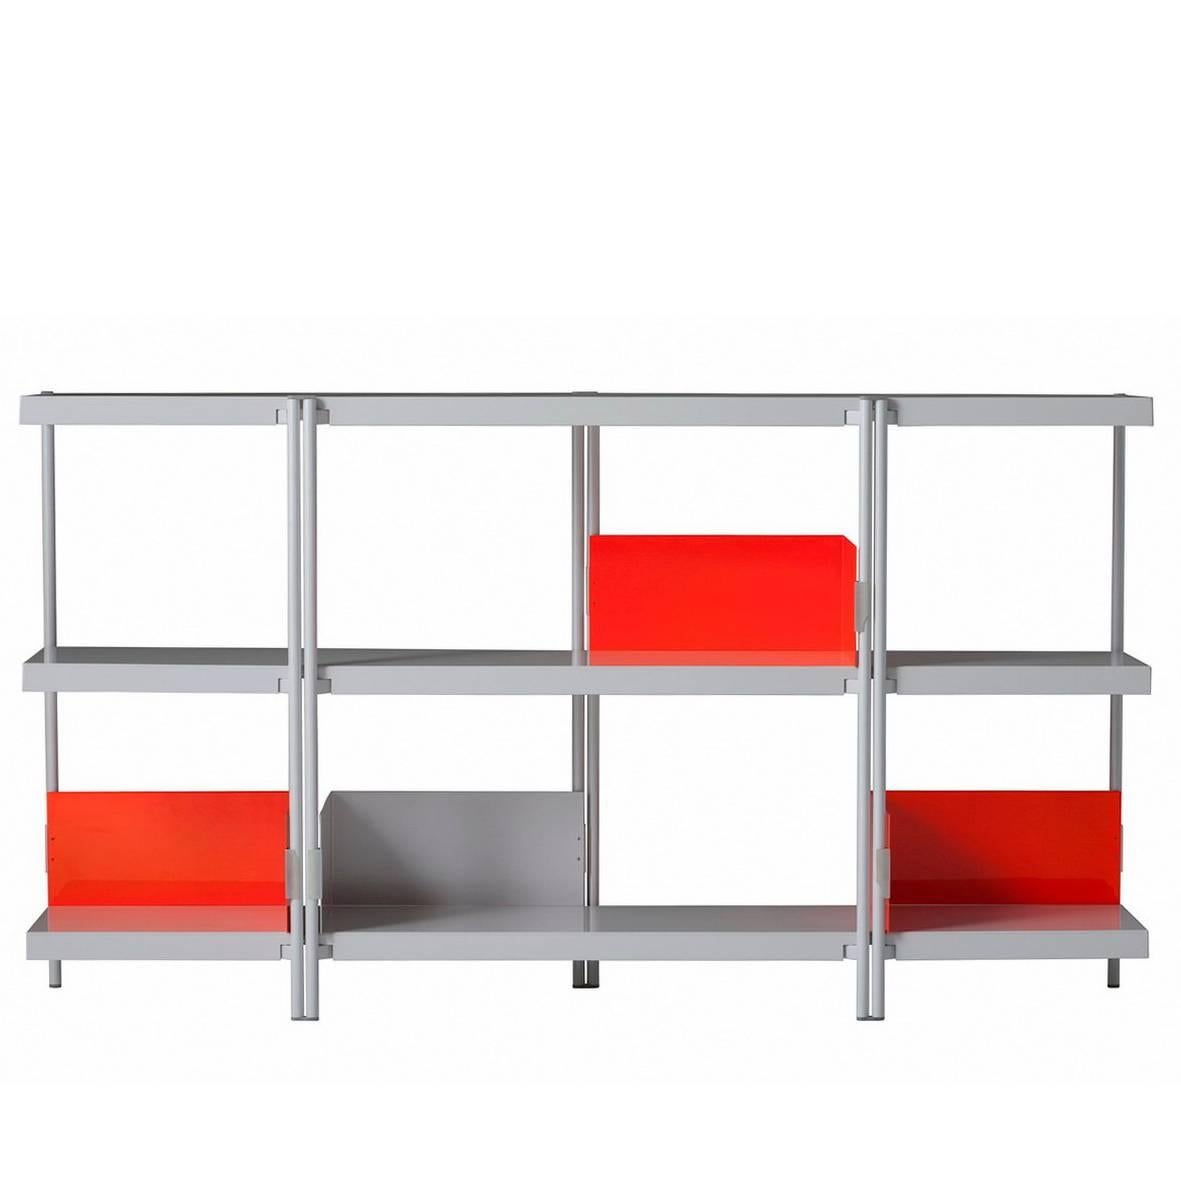 "Zigzag" Black or White Painted Steel Low Bookcase by Konstantin Grcic, Driade For Sale